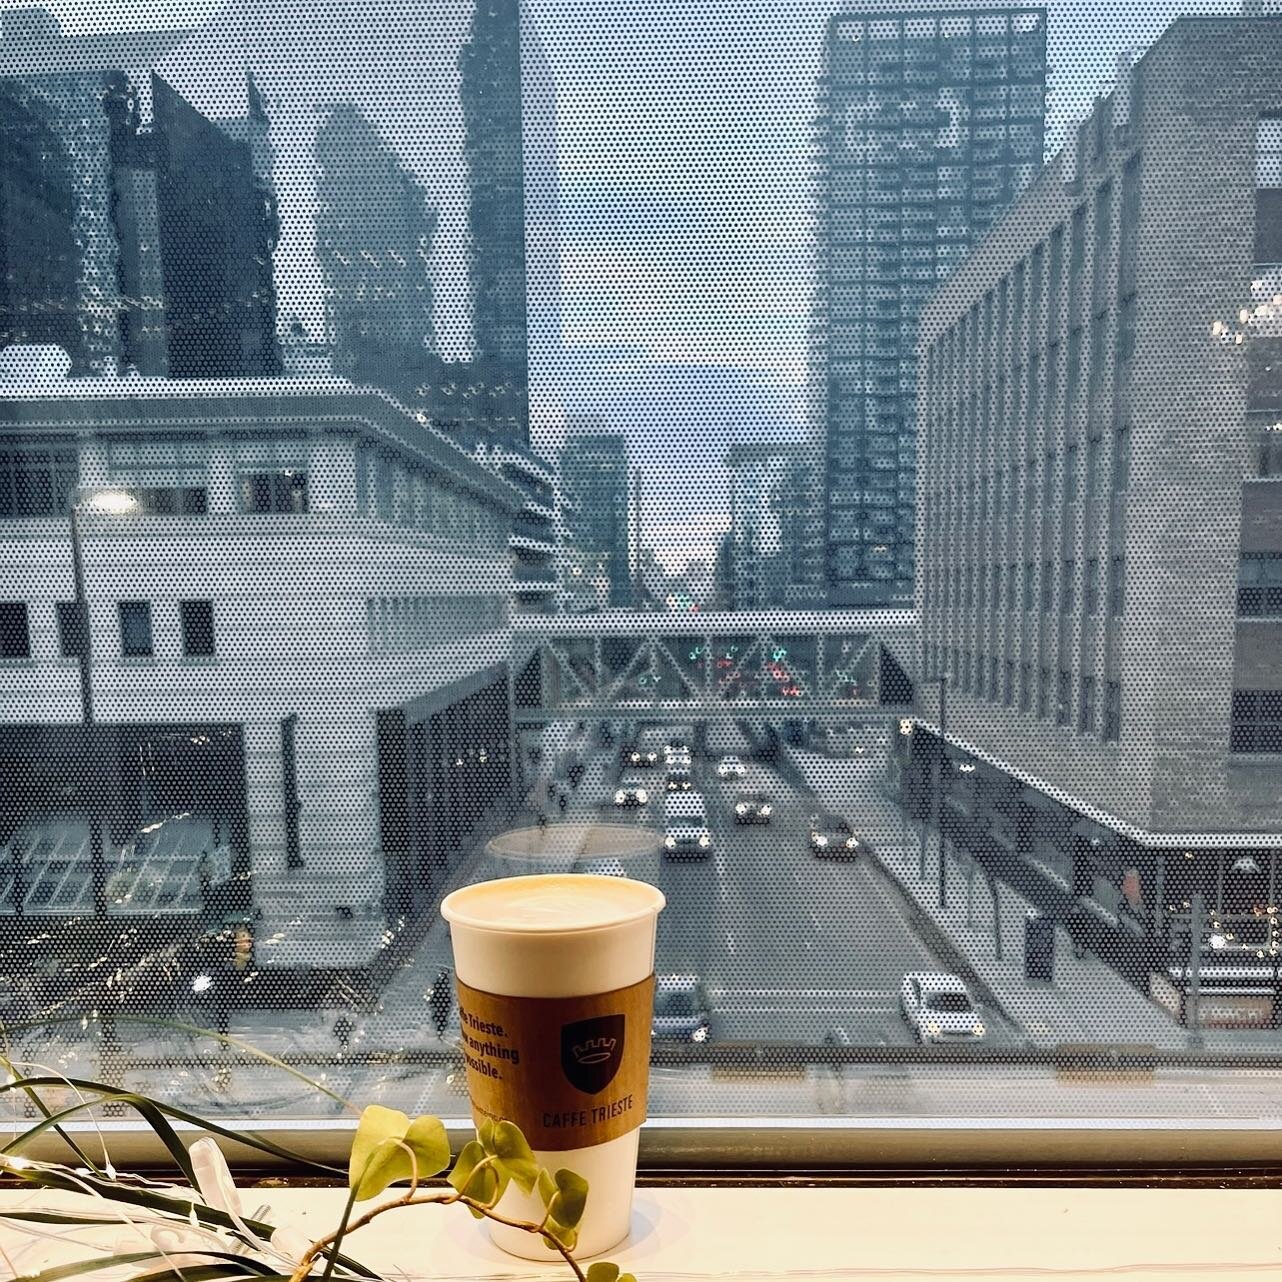 At Caffe Trieste your coffee anyways comes with a view ☕️ #caffetriestecanada